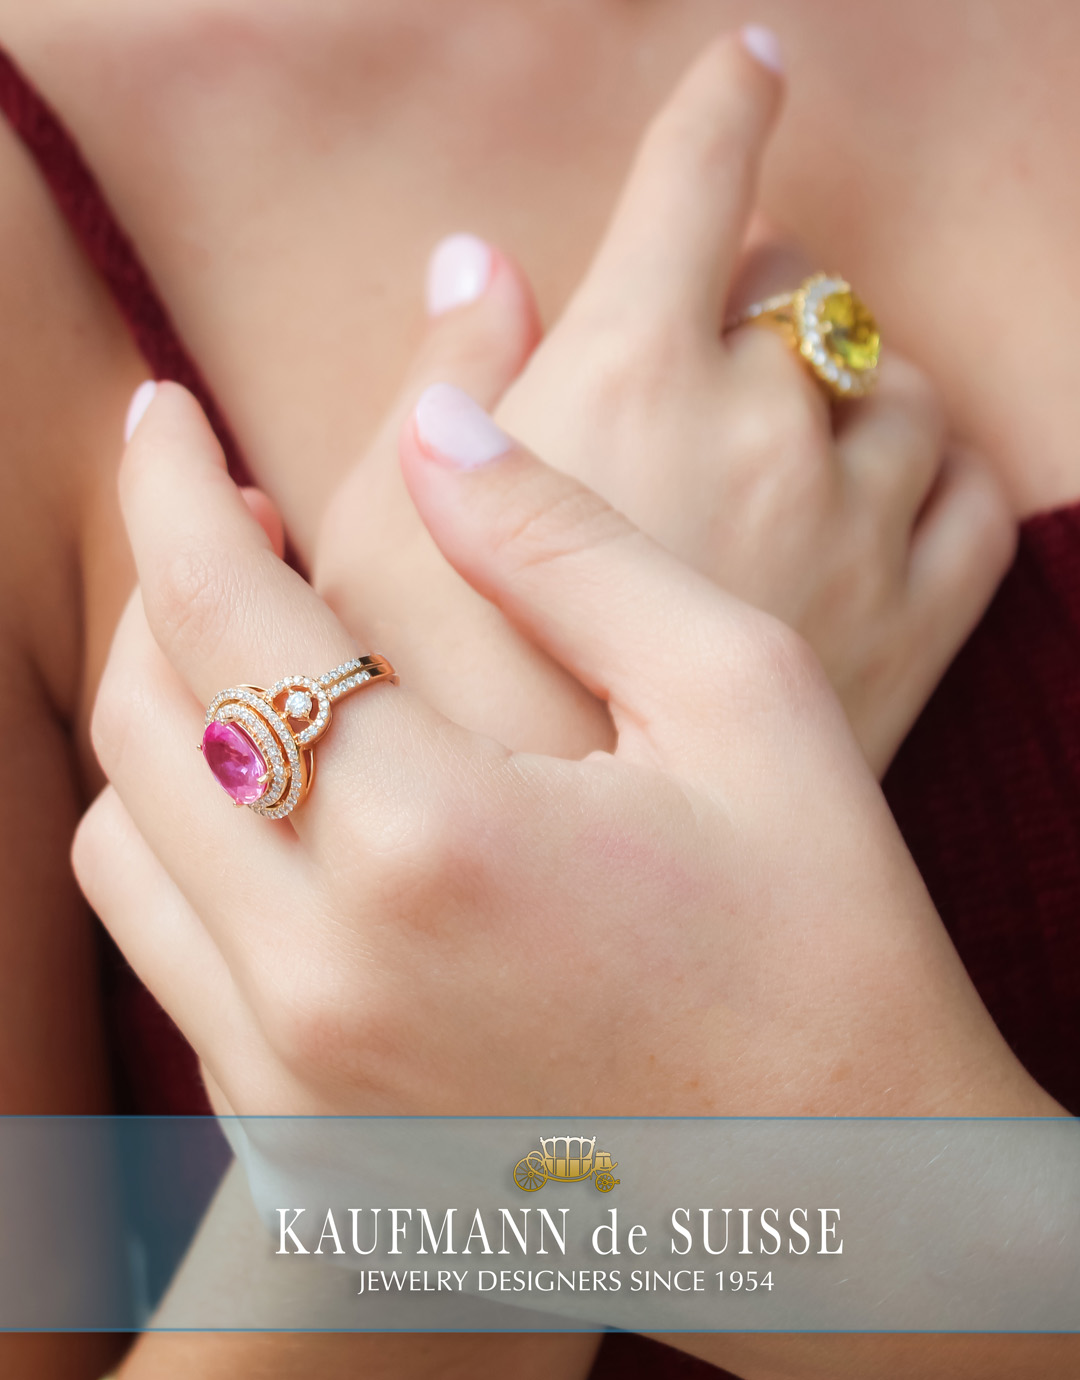 Pink Sapphire and Diamond Ring